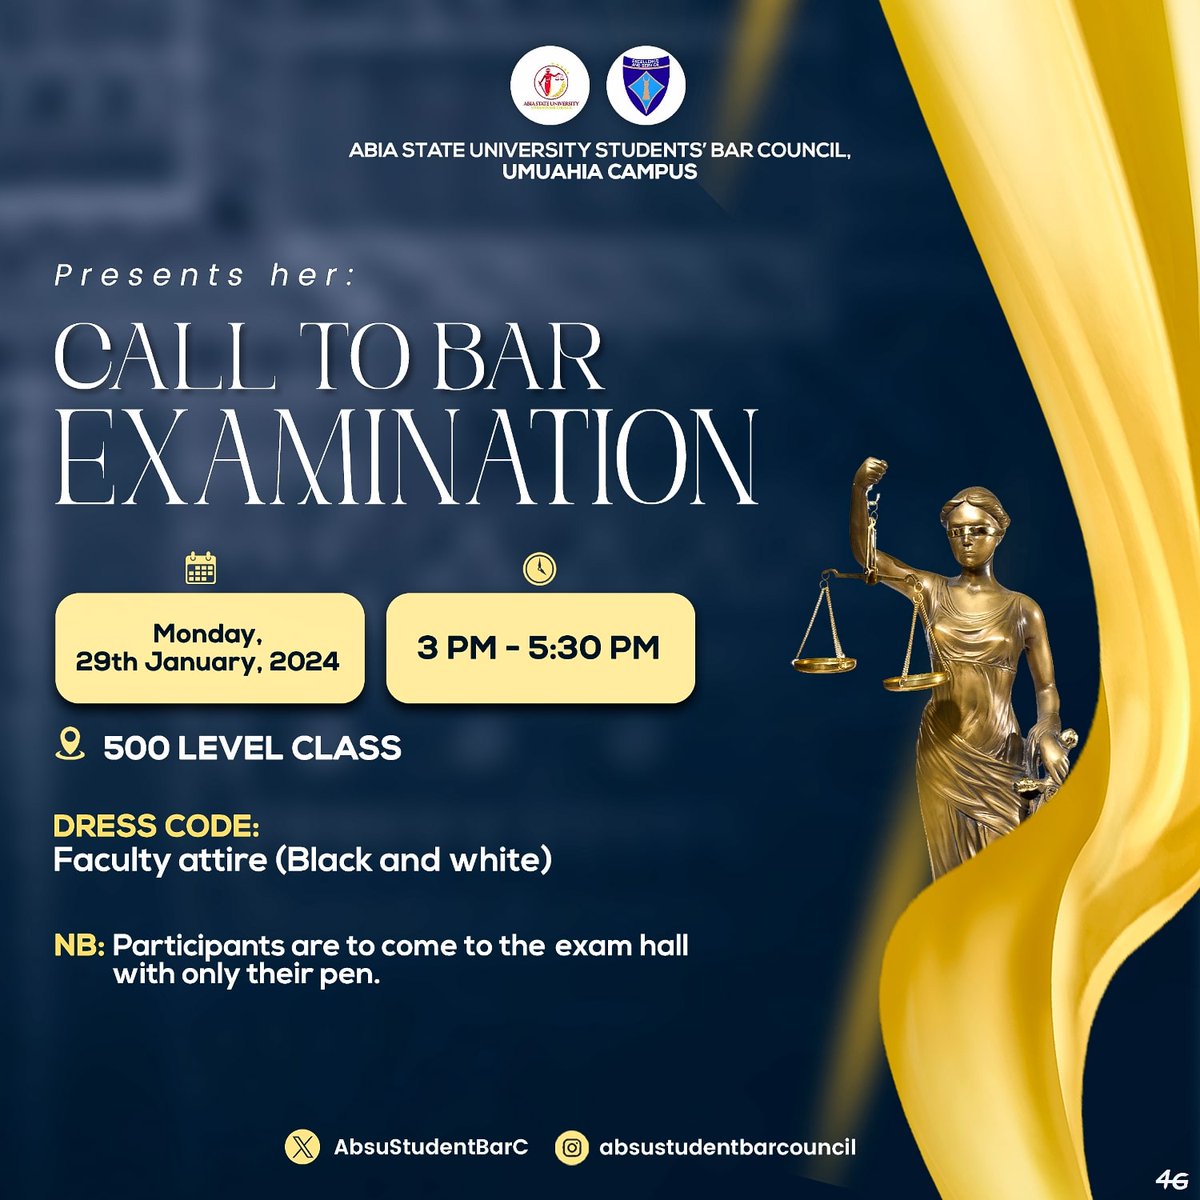 Photos from the bar examinations written on 29th January, 2024. 

In well invigilated halls with highly prepared Students.

Call to Bar Ceremony up next!!
Congratulations in advance to the candidates.

#barexams #calltobar #viral #explore #absu #lawfaculty